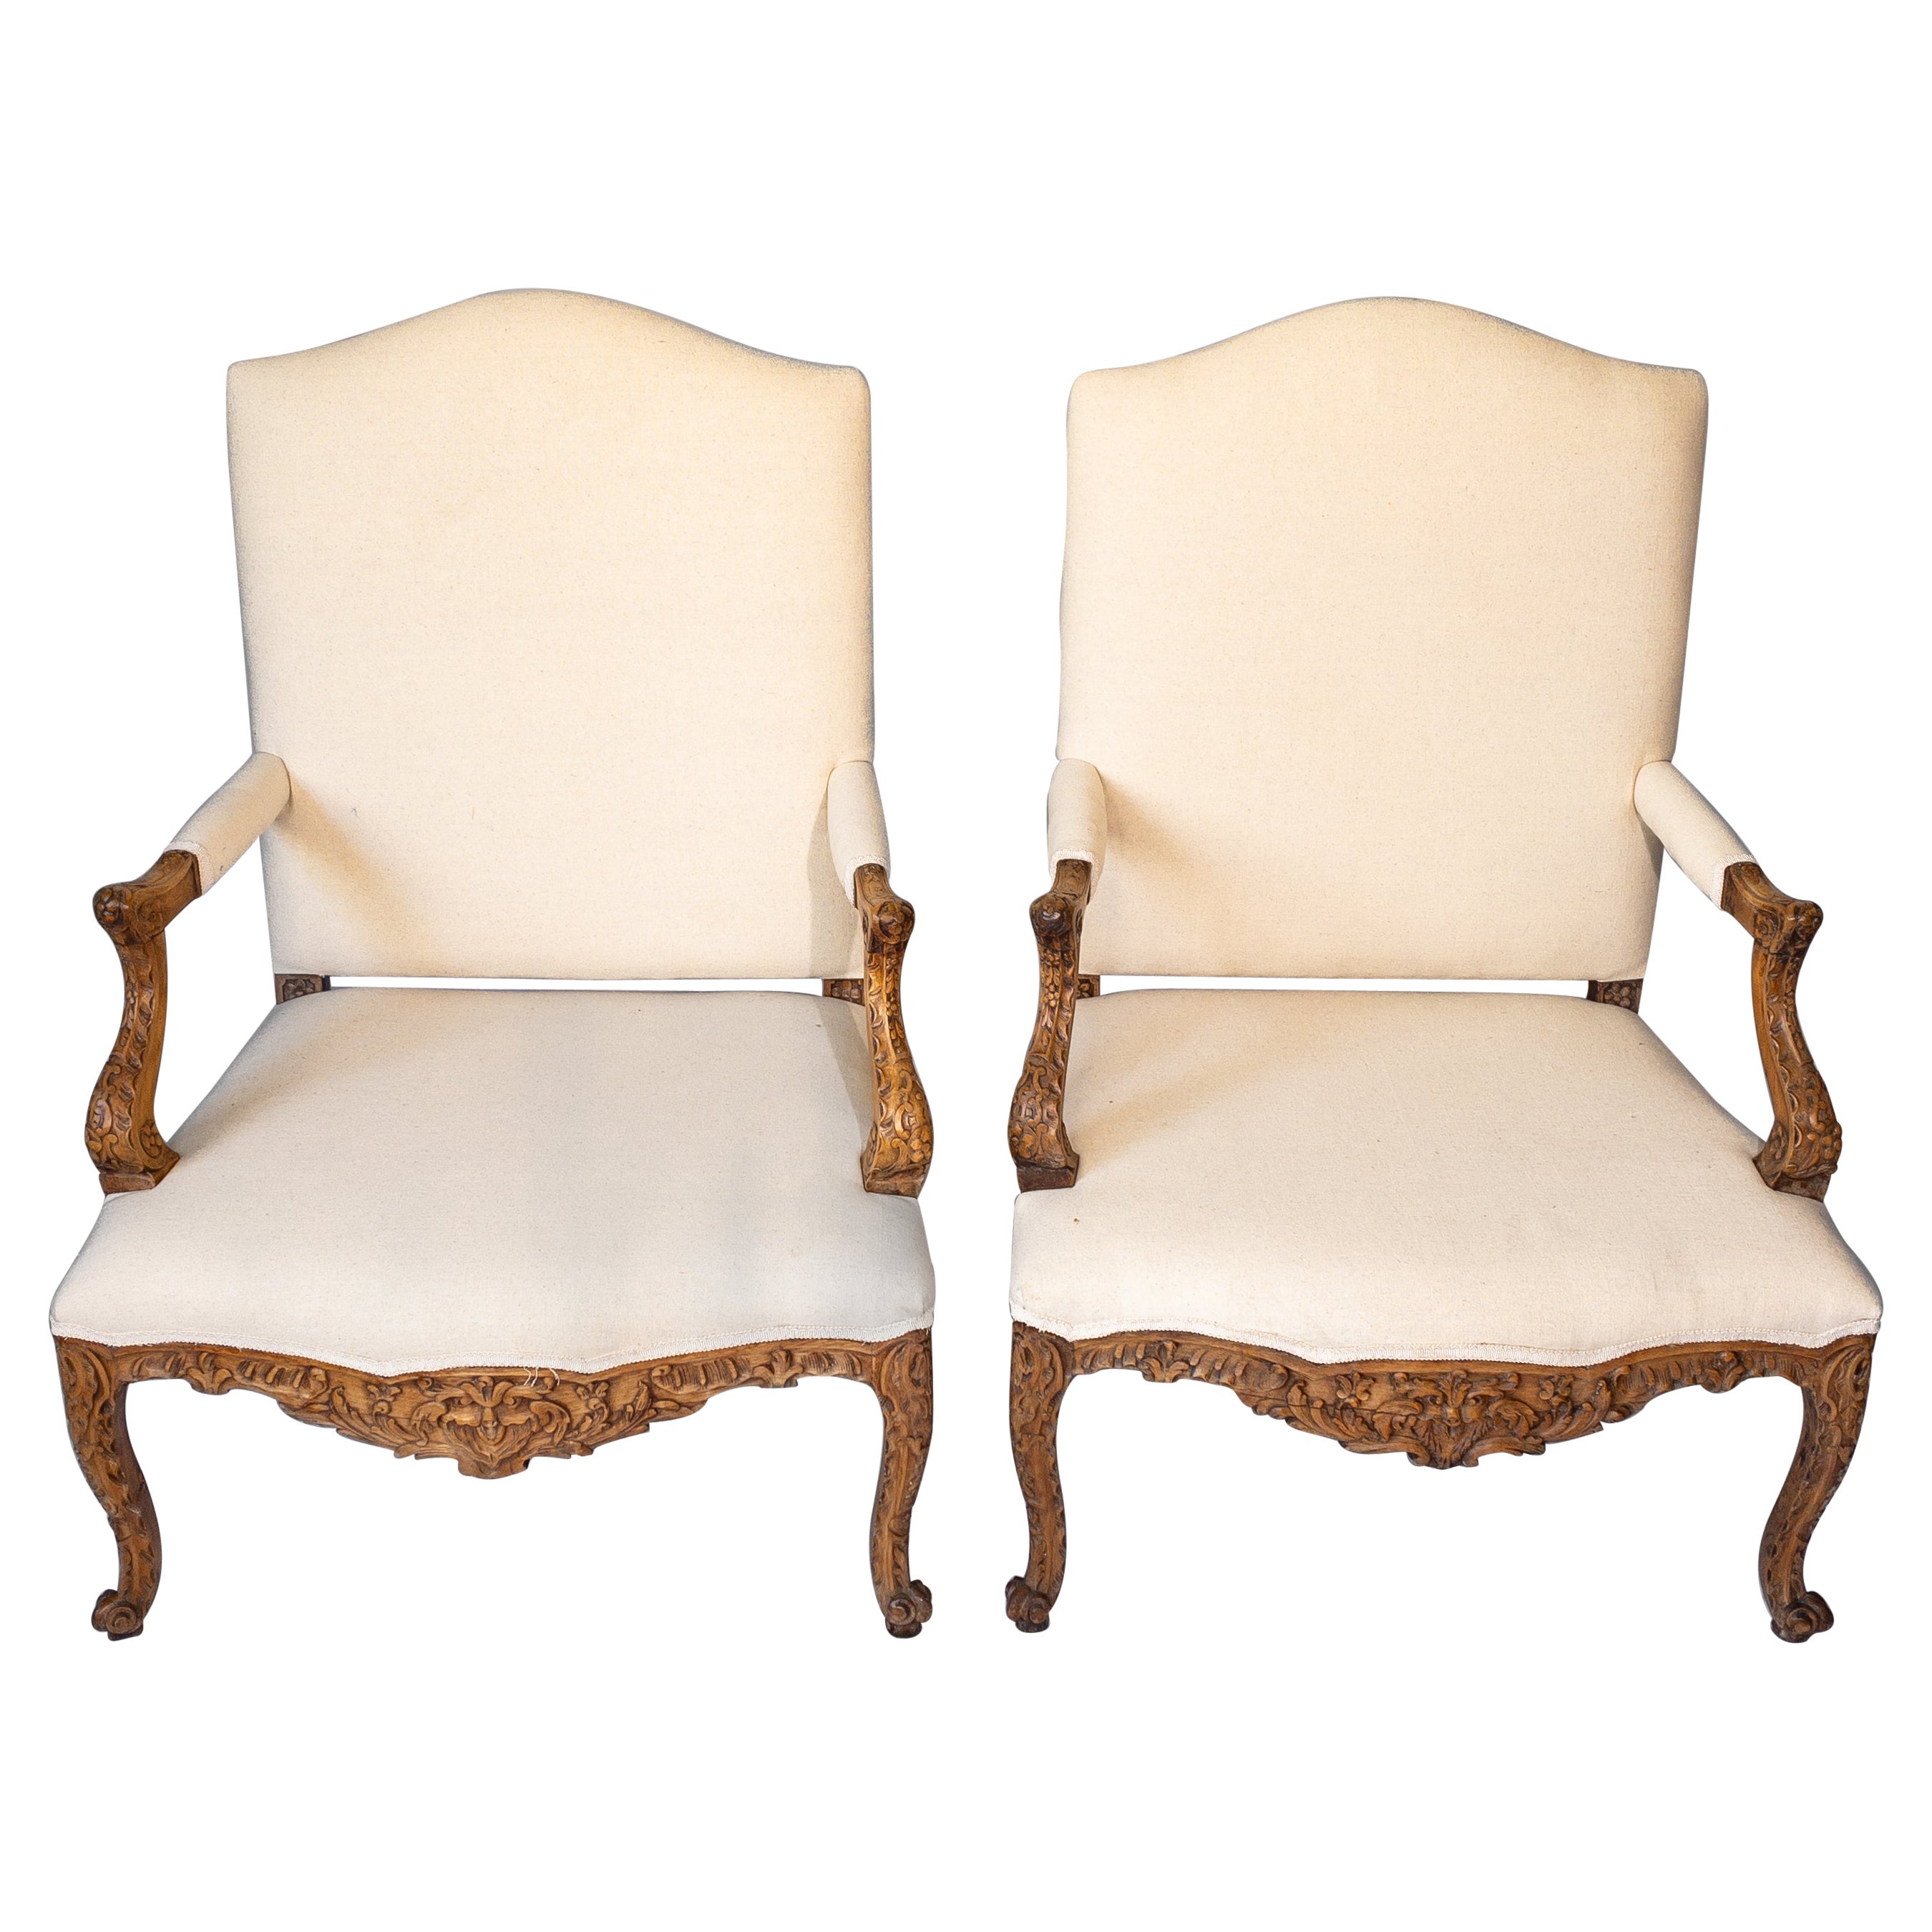 Pair of 19th Century French Louis XV Style Carved Wooden Arm Chairs For Sale